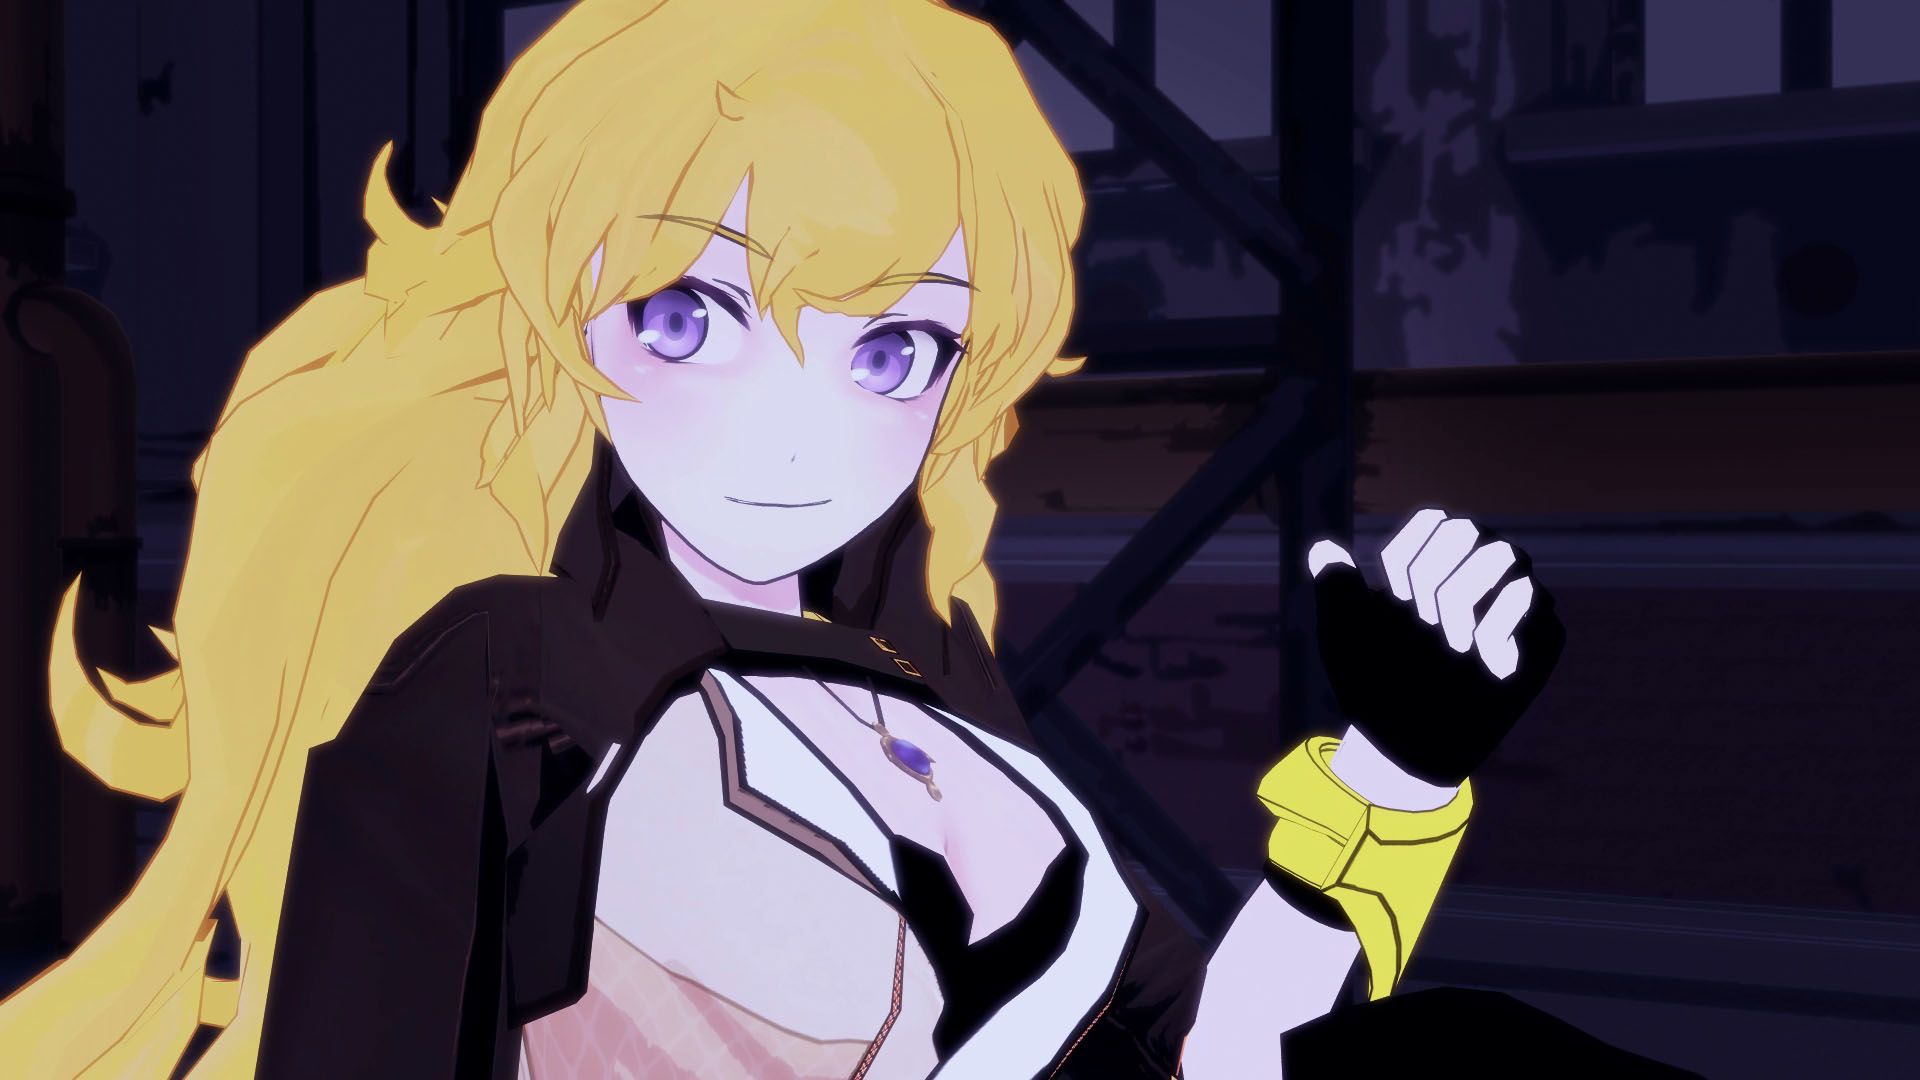 Painting The Town Rwby Wiki Fandom